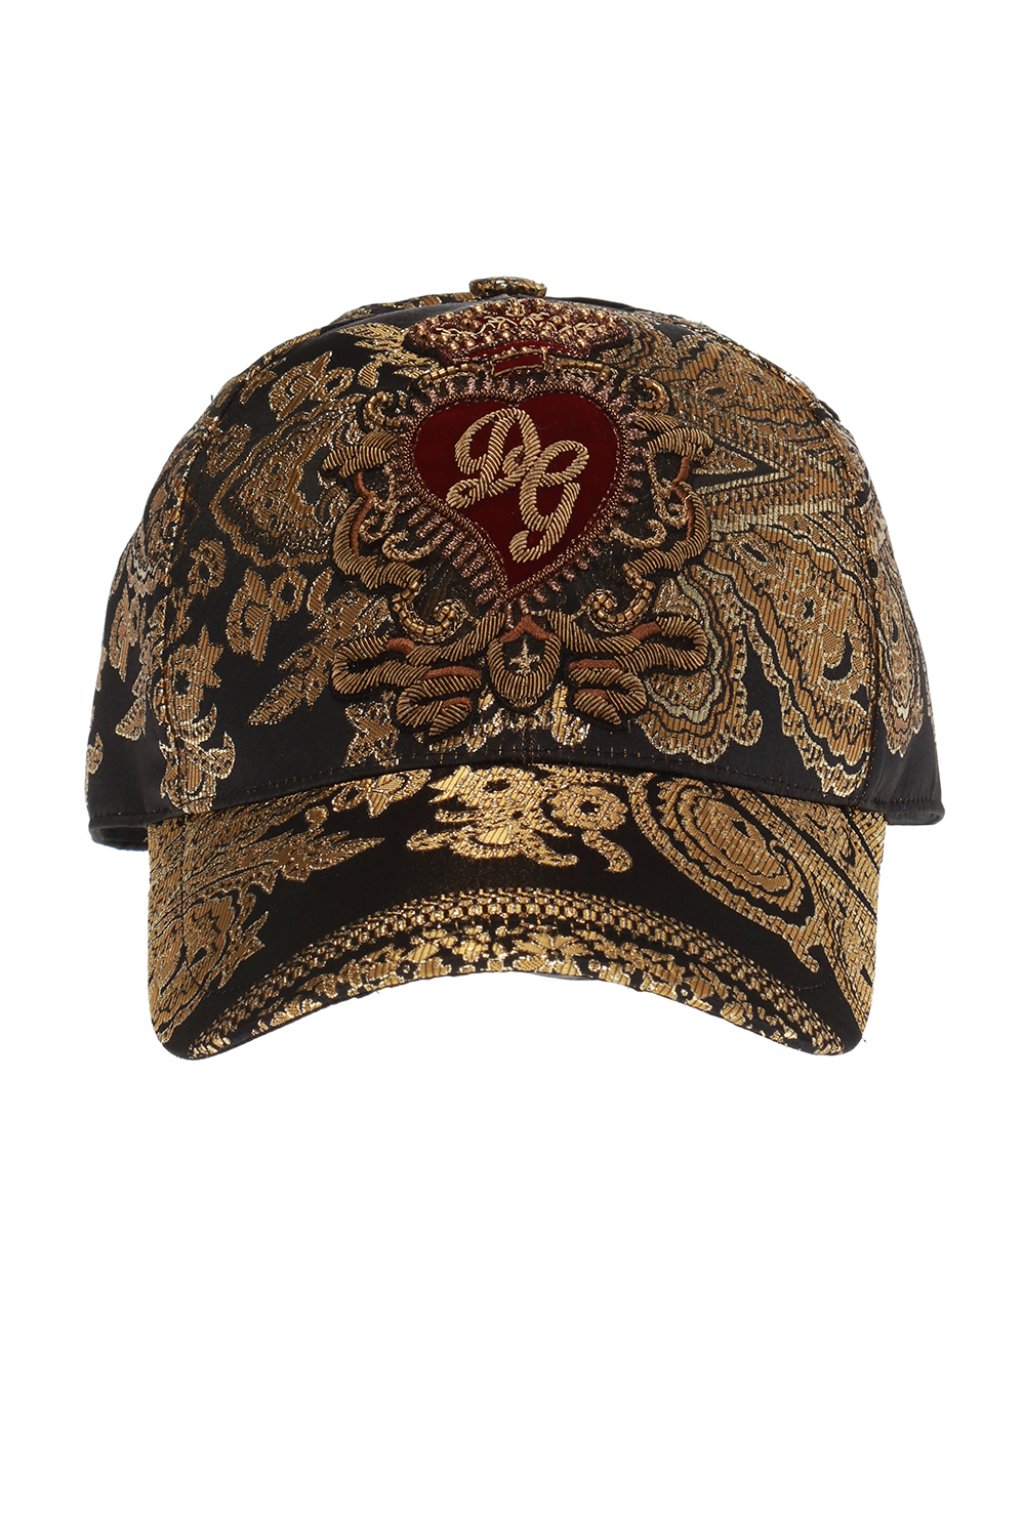 Dolce And Gabbana Caps Online Deals, 46% OFF | purewater.mx